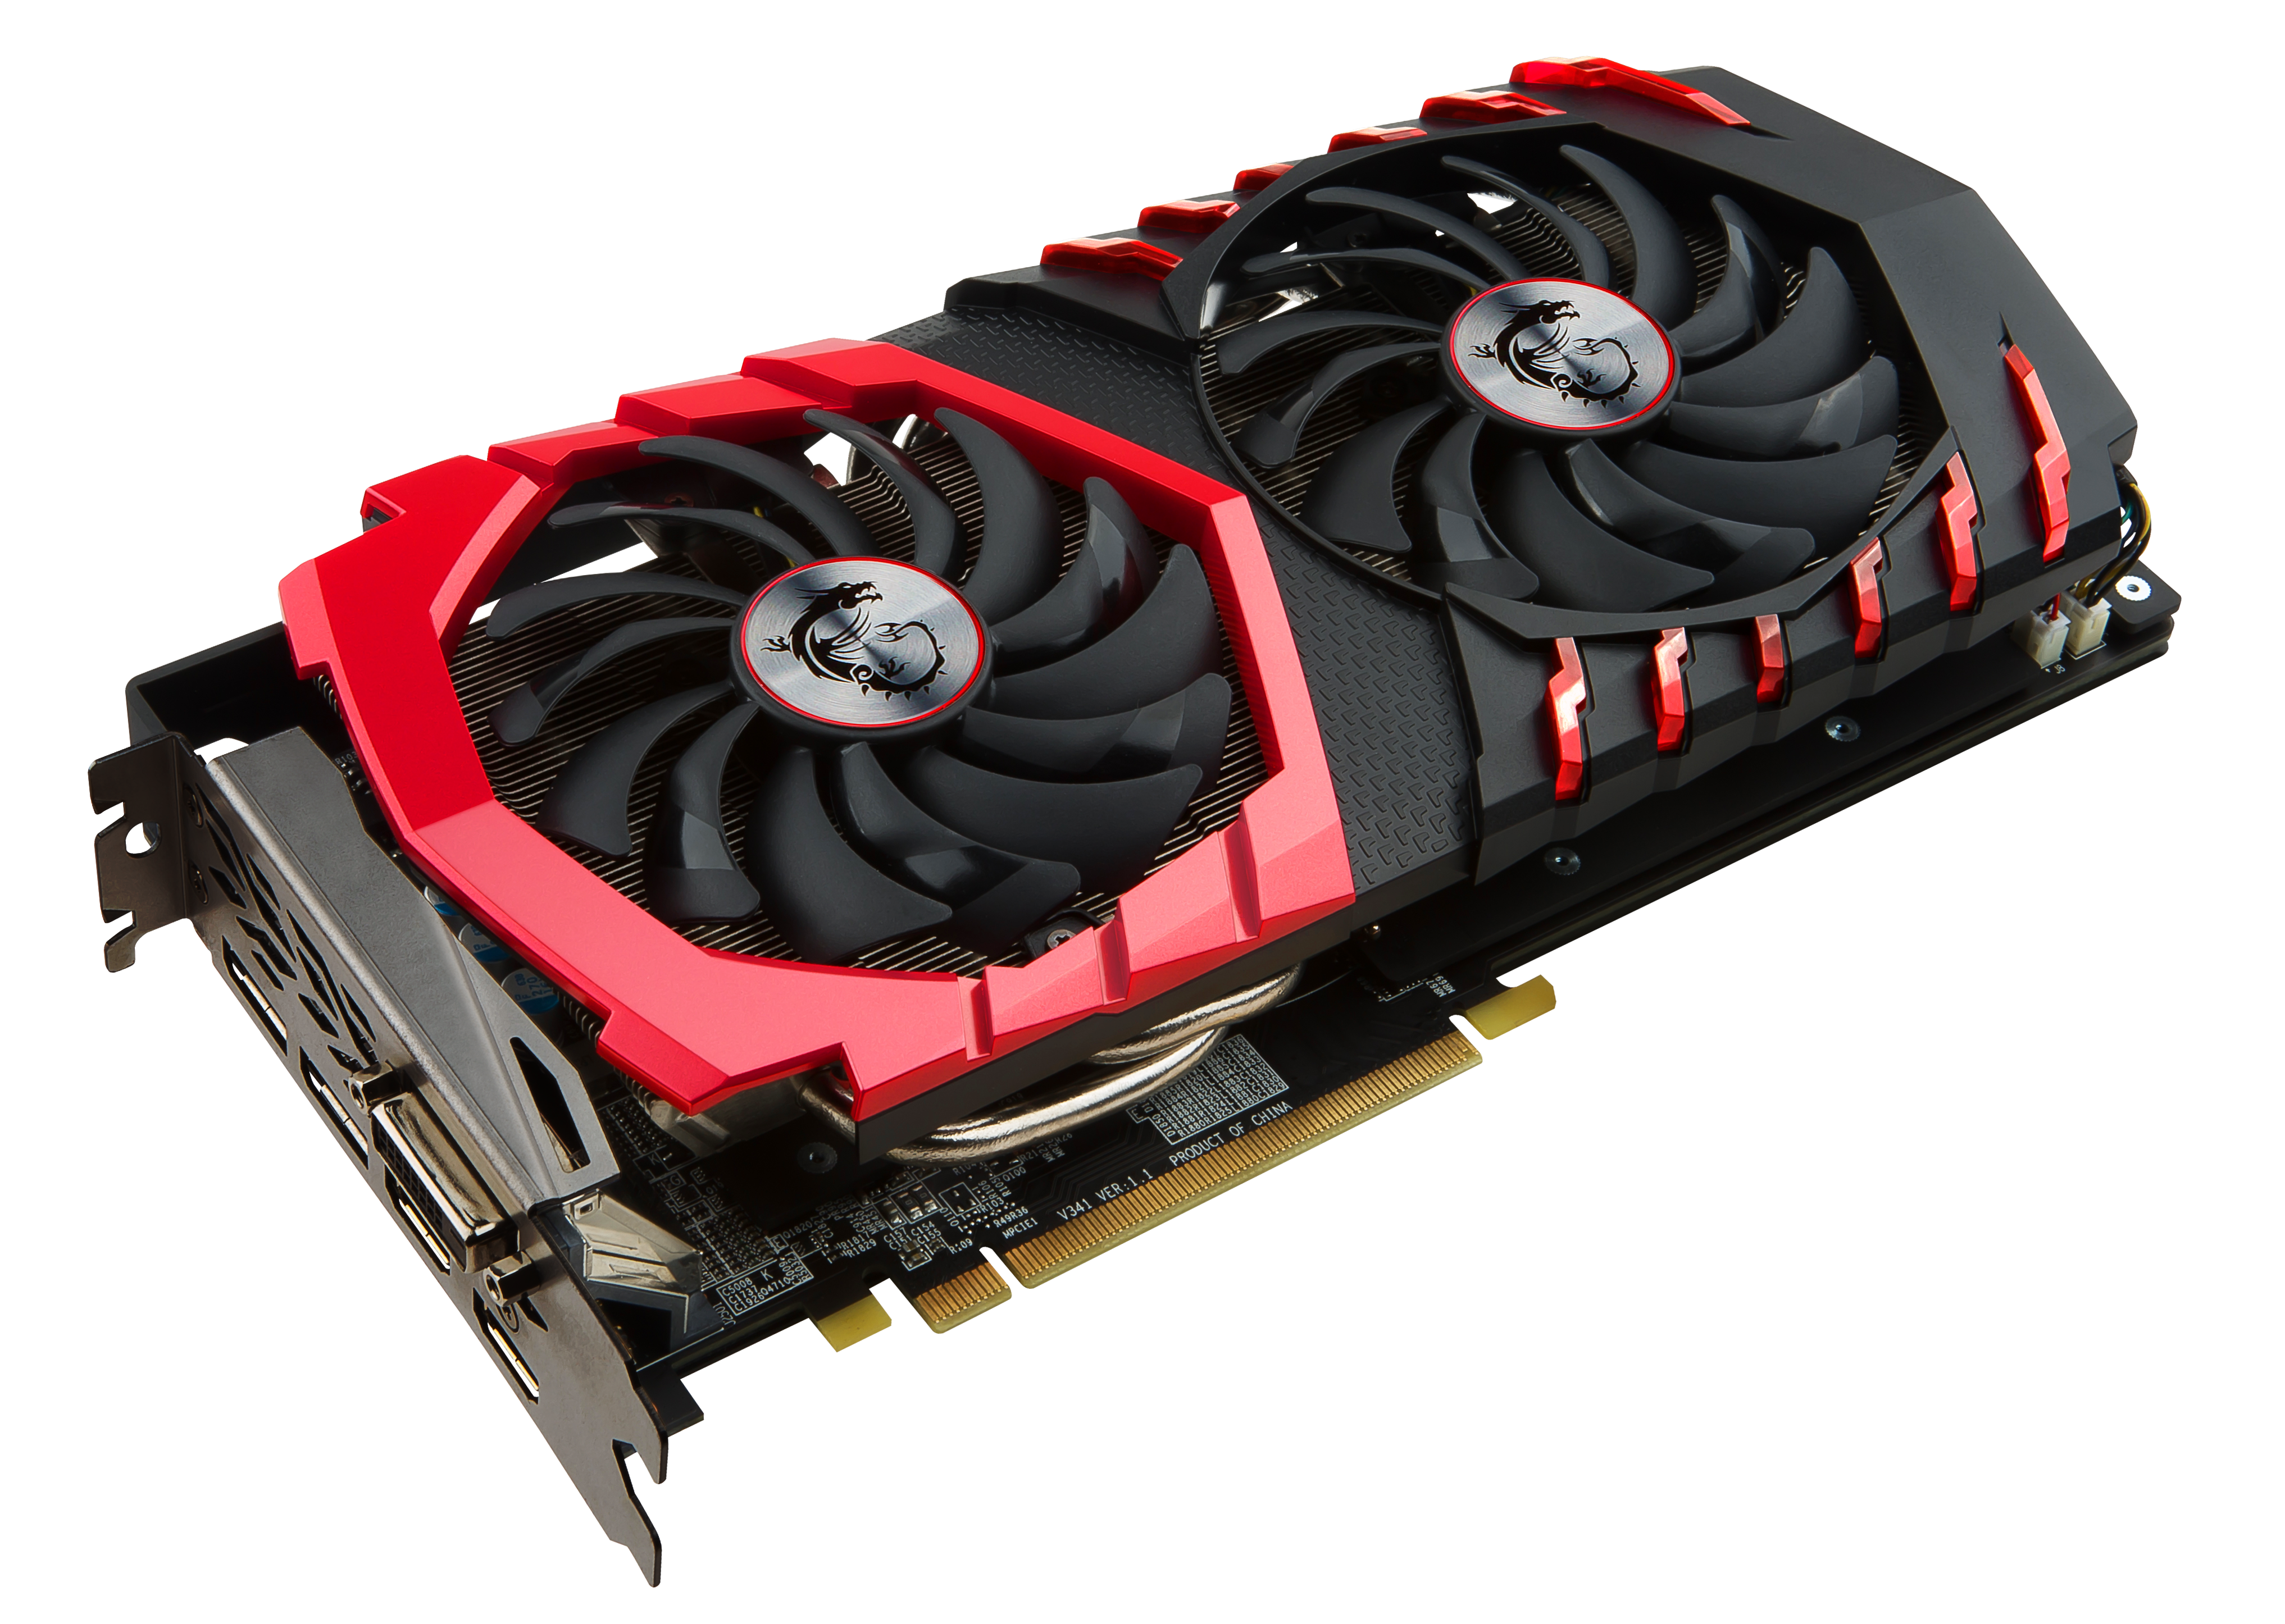 MSI Shows New Radeon RX 480 Gaming Cards, with an 8-pin